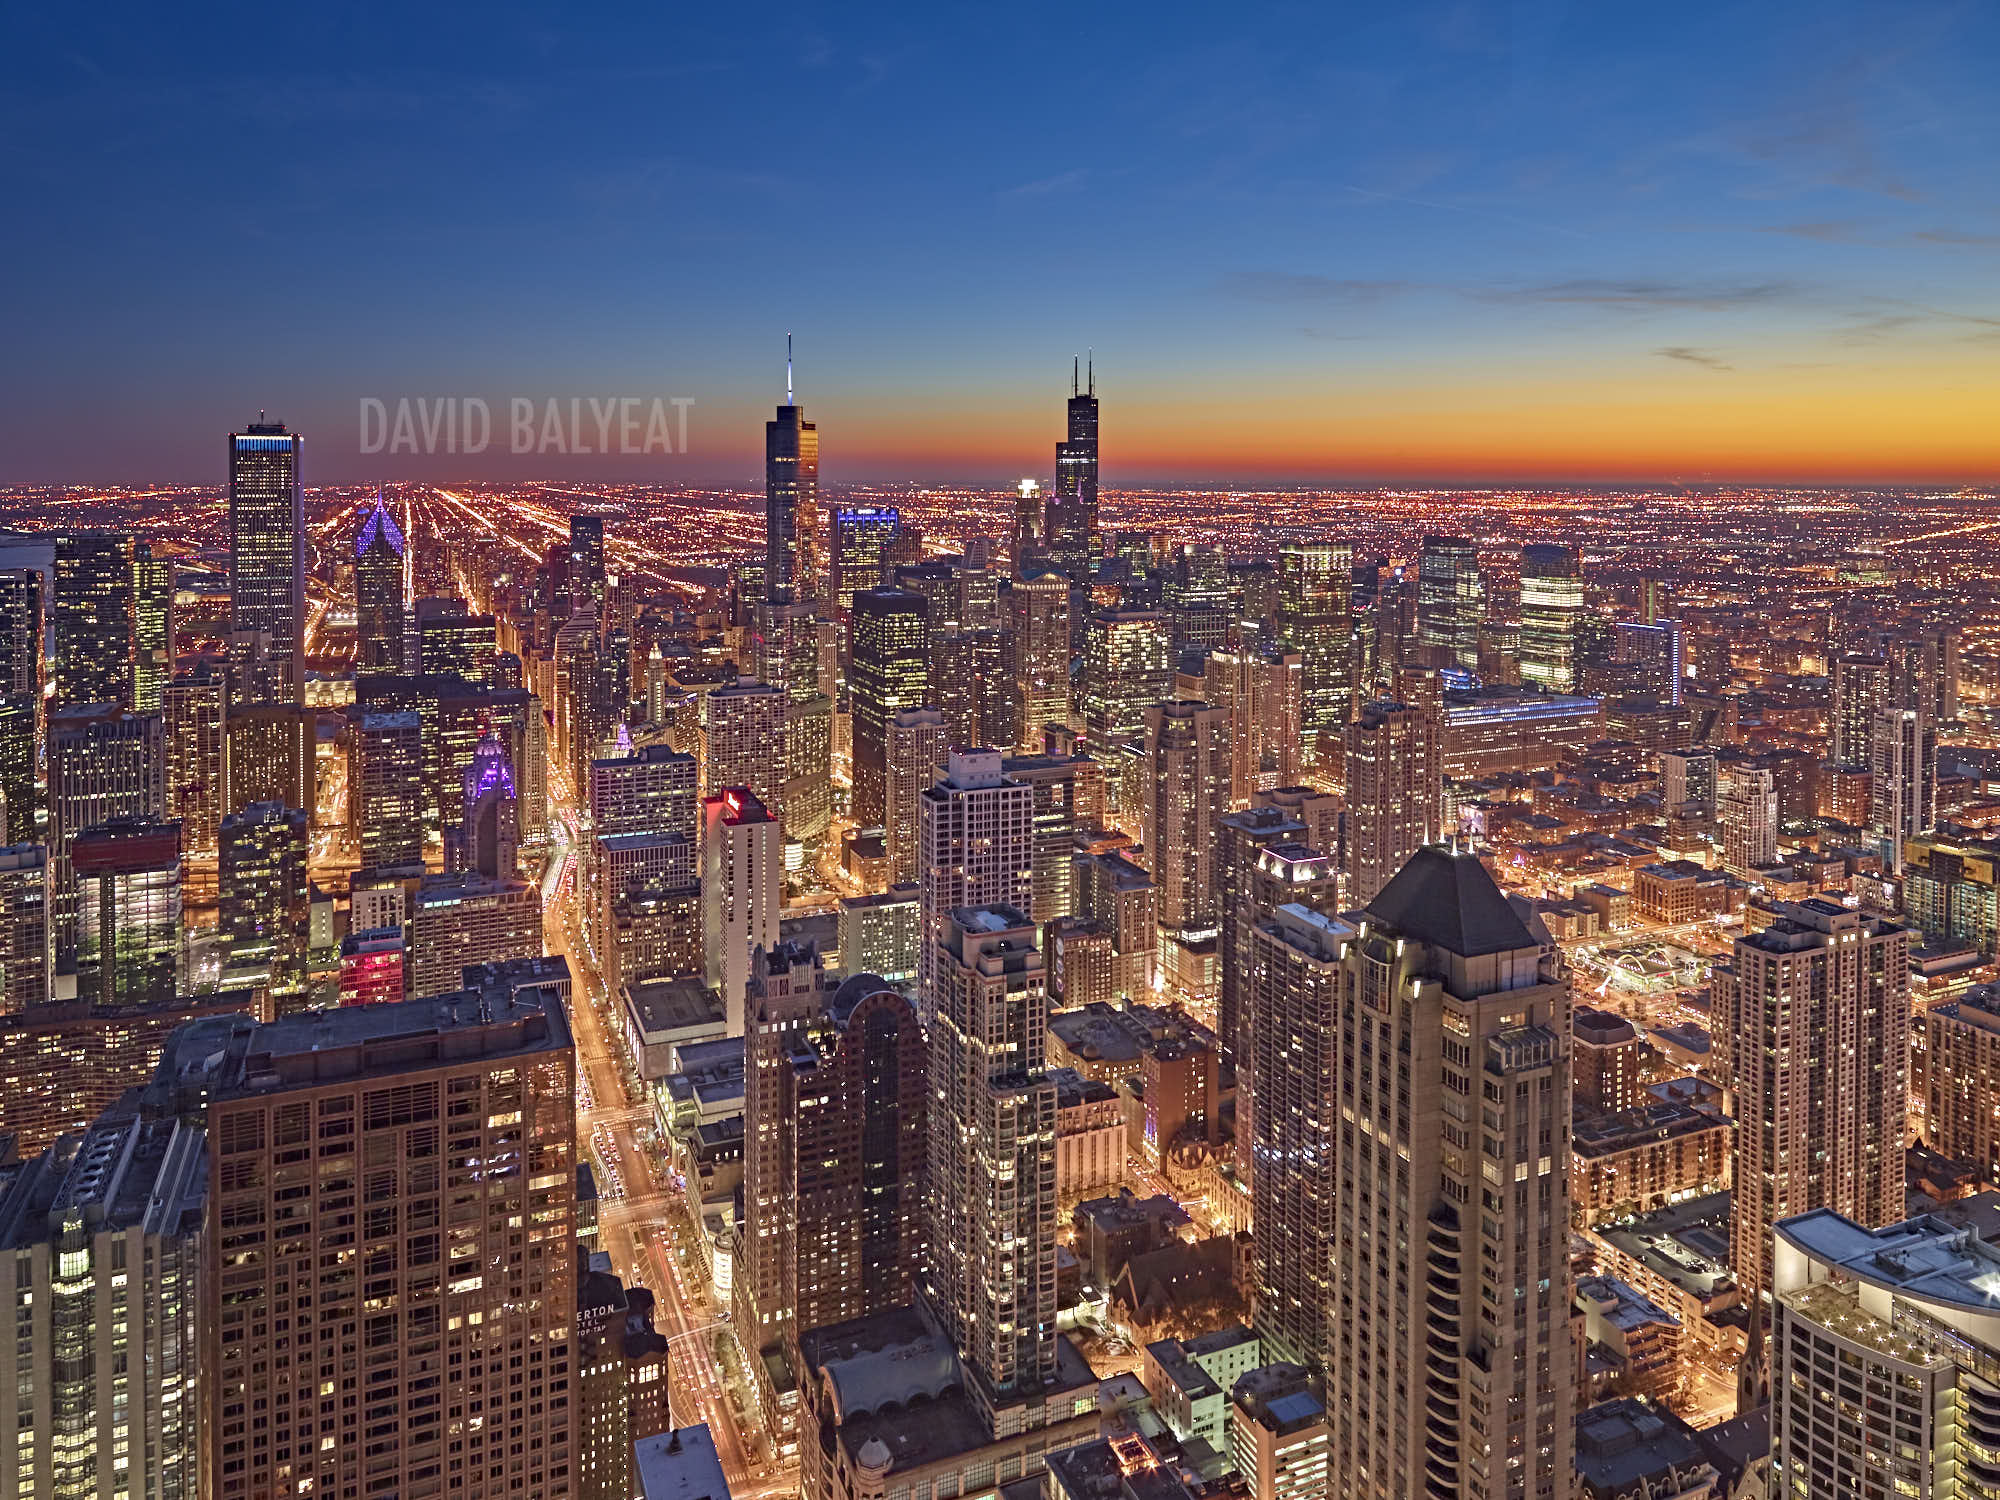 Chicagoland-chicago-skyline-cityscape-willis-trump-tower-high-definition-hd-professional-landscape-photography